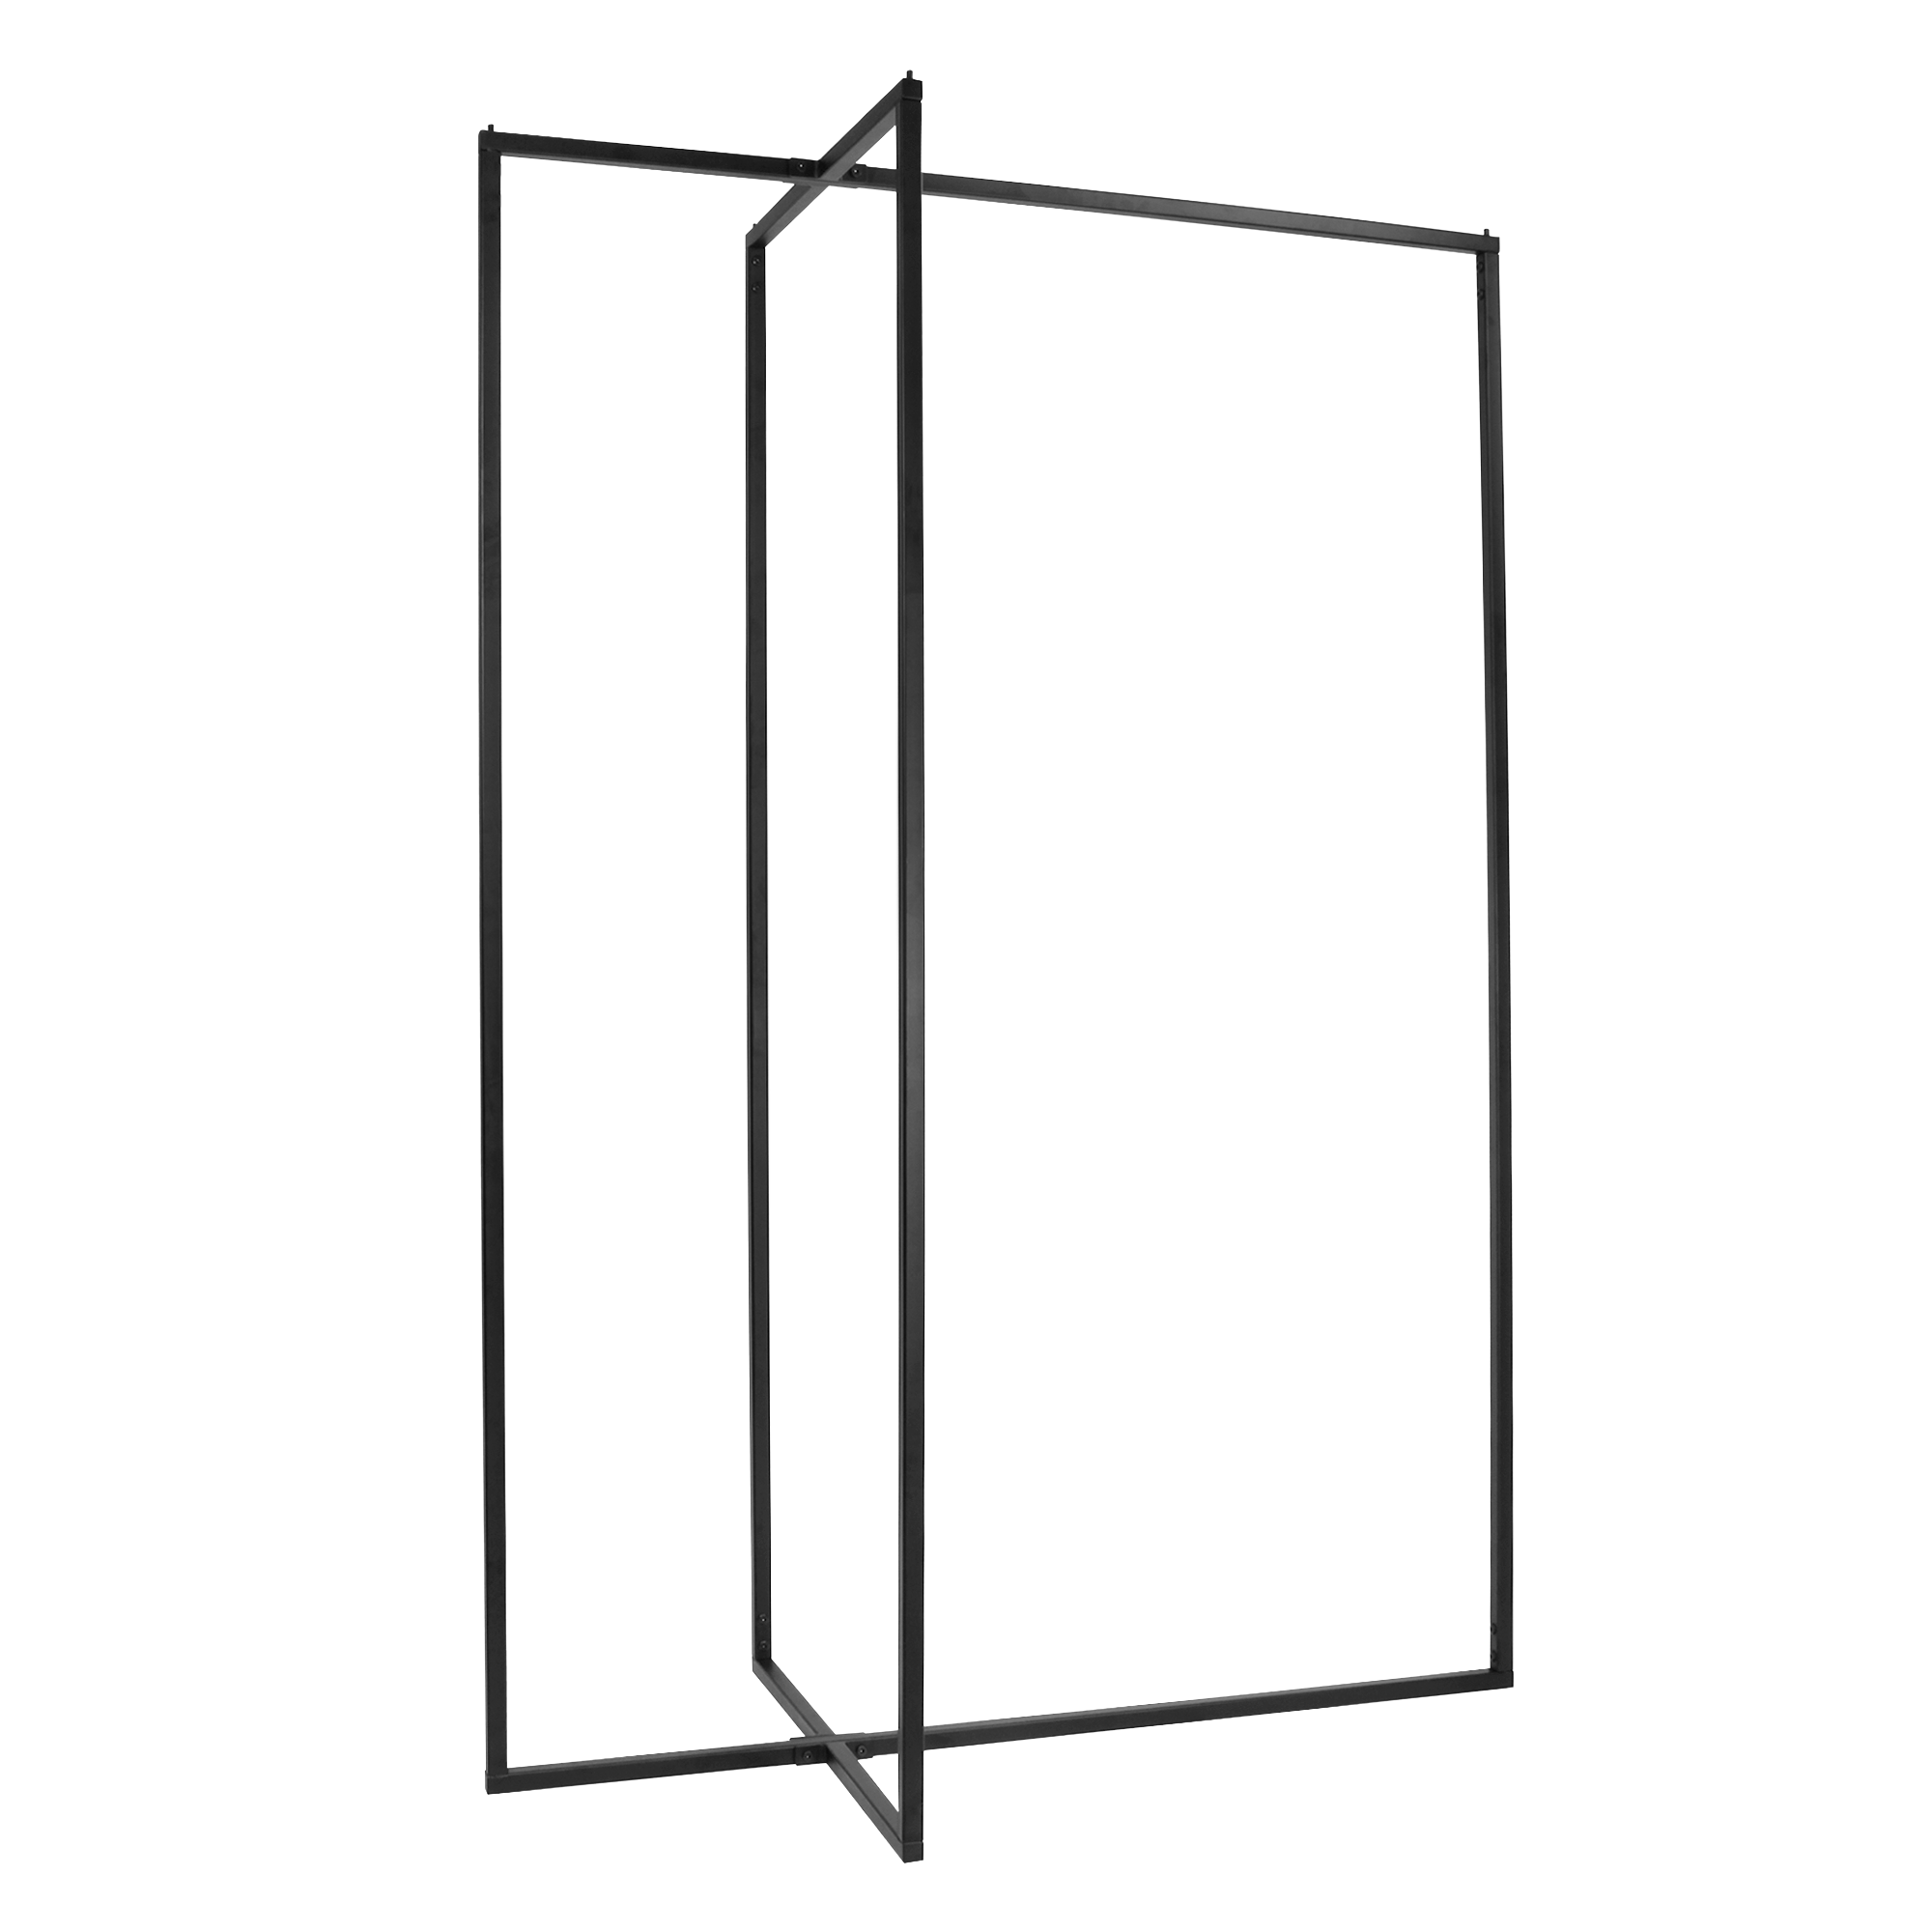 Copy of clothes rack BASIS